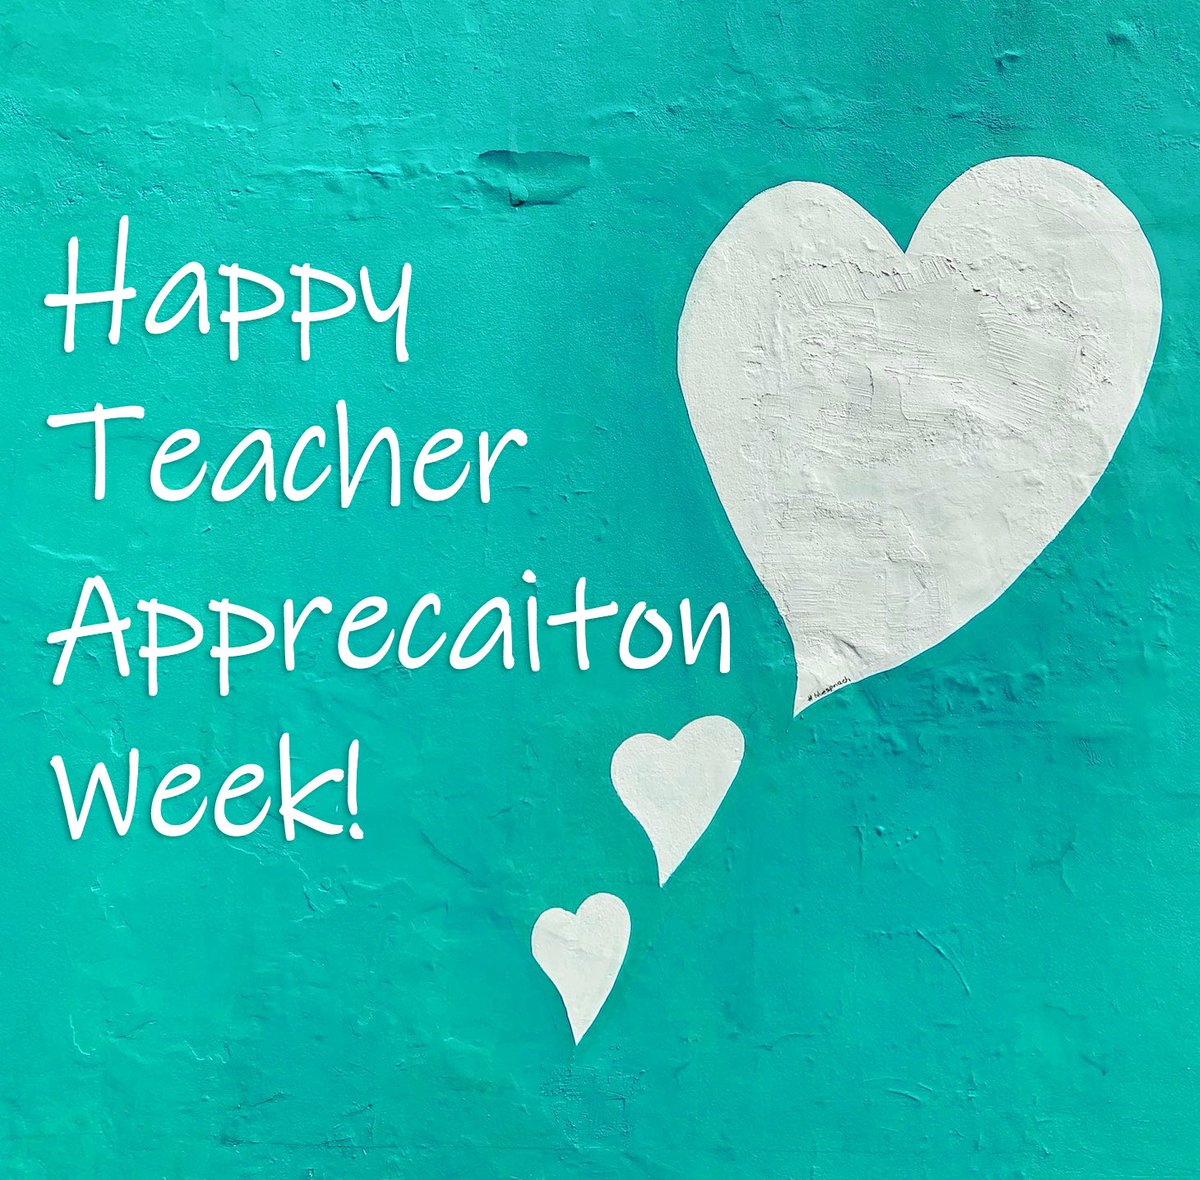 It’s #TeacherAppreciationWeek & #TheReadersHeart is showing teacher love. This is 1 of my favorite podcasts. @jenniferlagarde & her guests always impress & I’ve heard every episode. Feeling extra appreciated as a teacher & author to be on to talk books, schools, & much more.